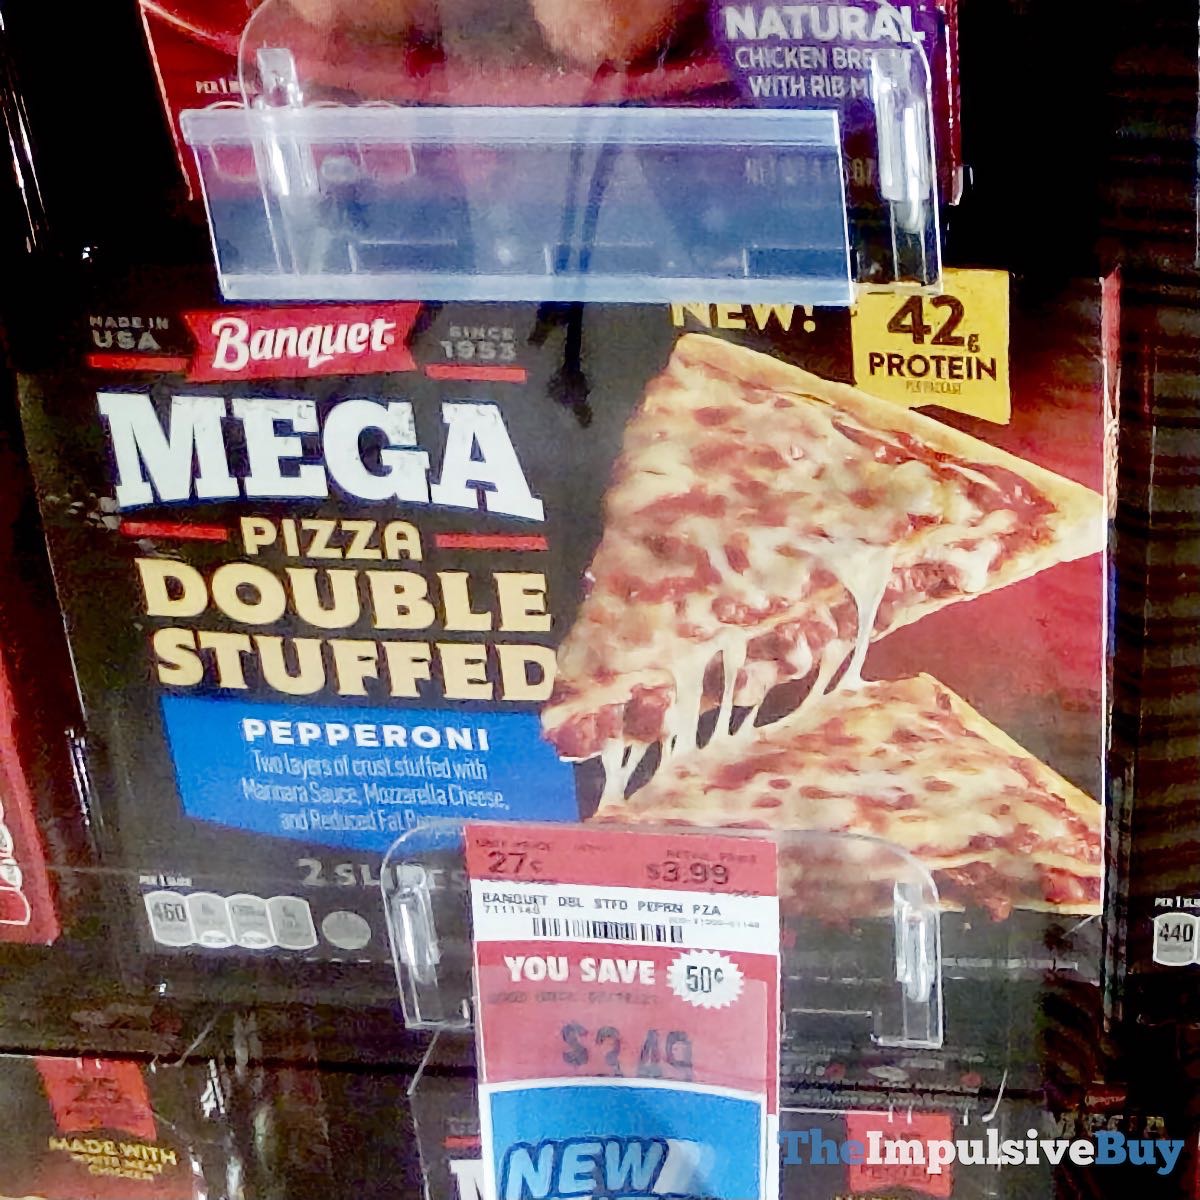 SPOTTED Banquet Double Stuffed Mega Pizza The Impulsive Buy